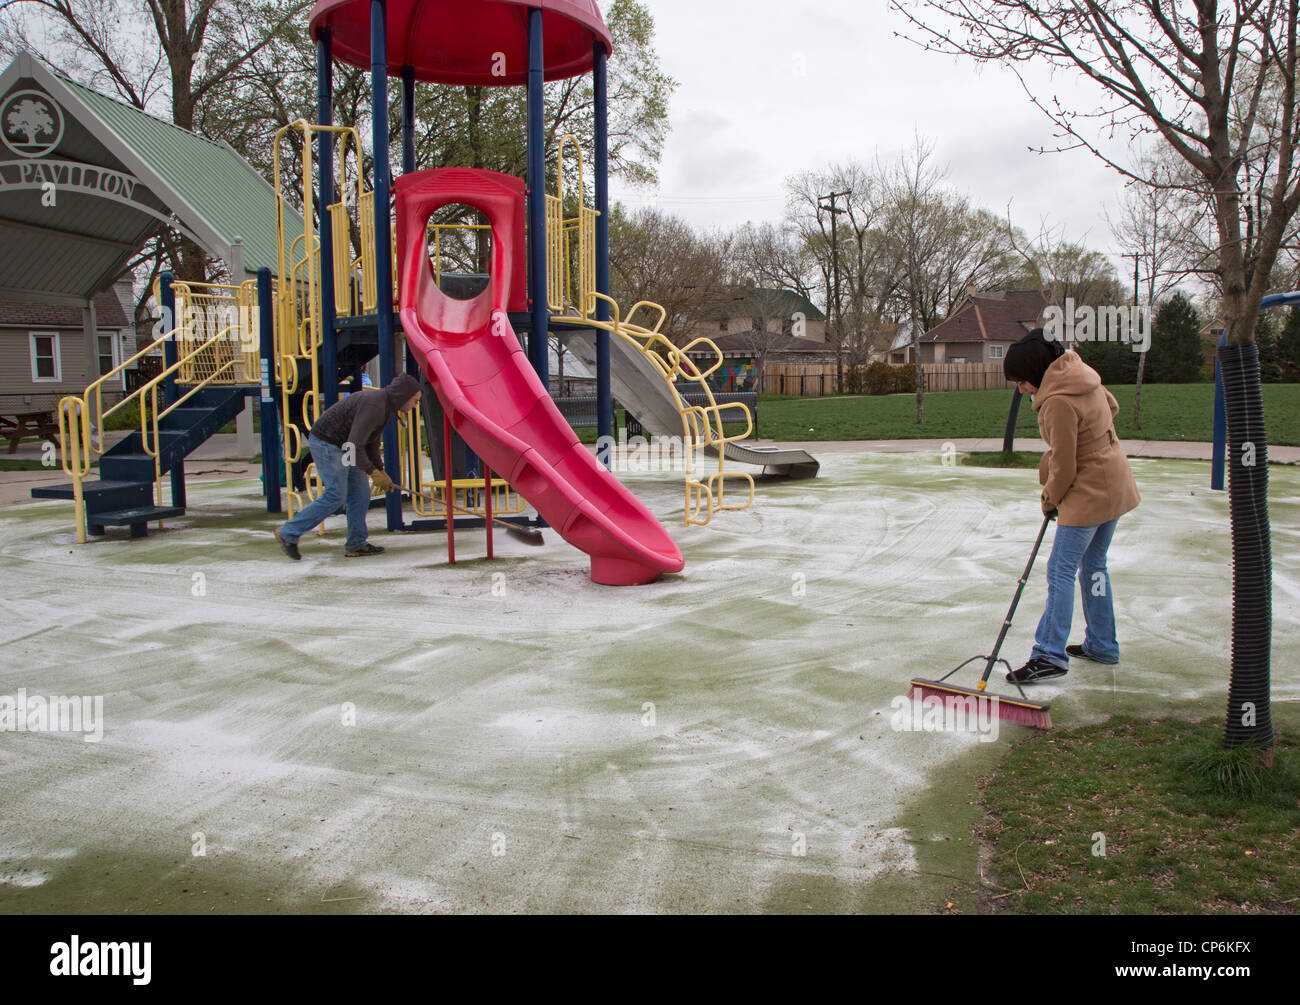 Detroit, Michigan - High school and college volunteers clean a playground. Stock Photo